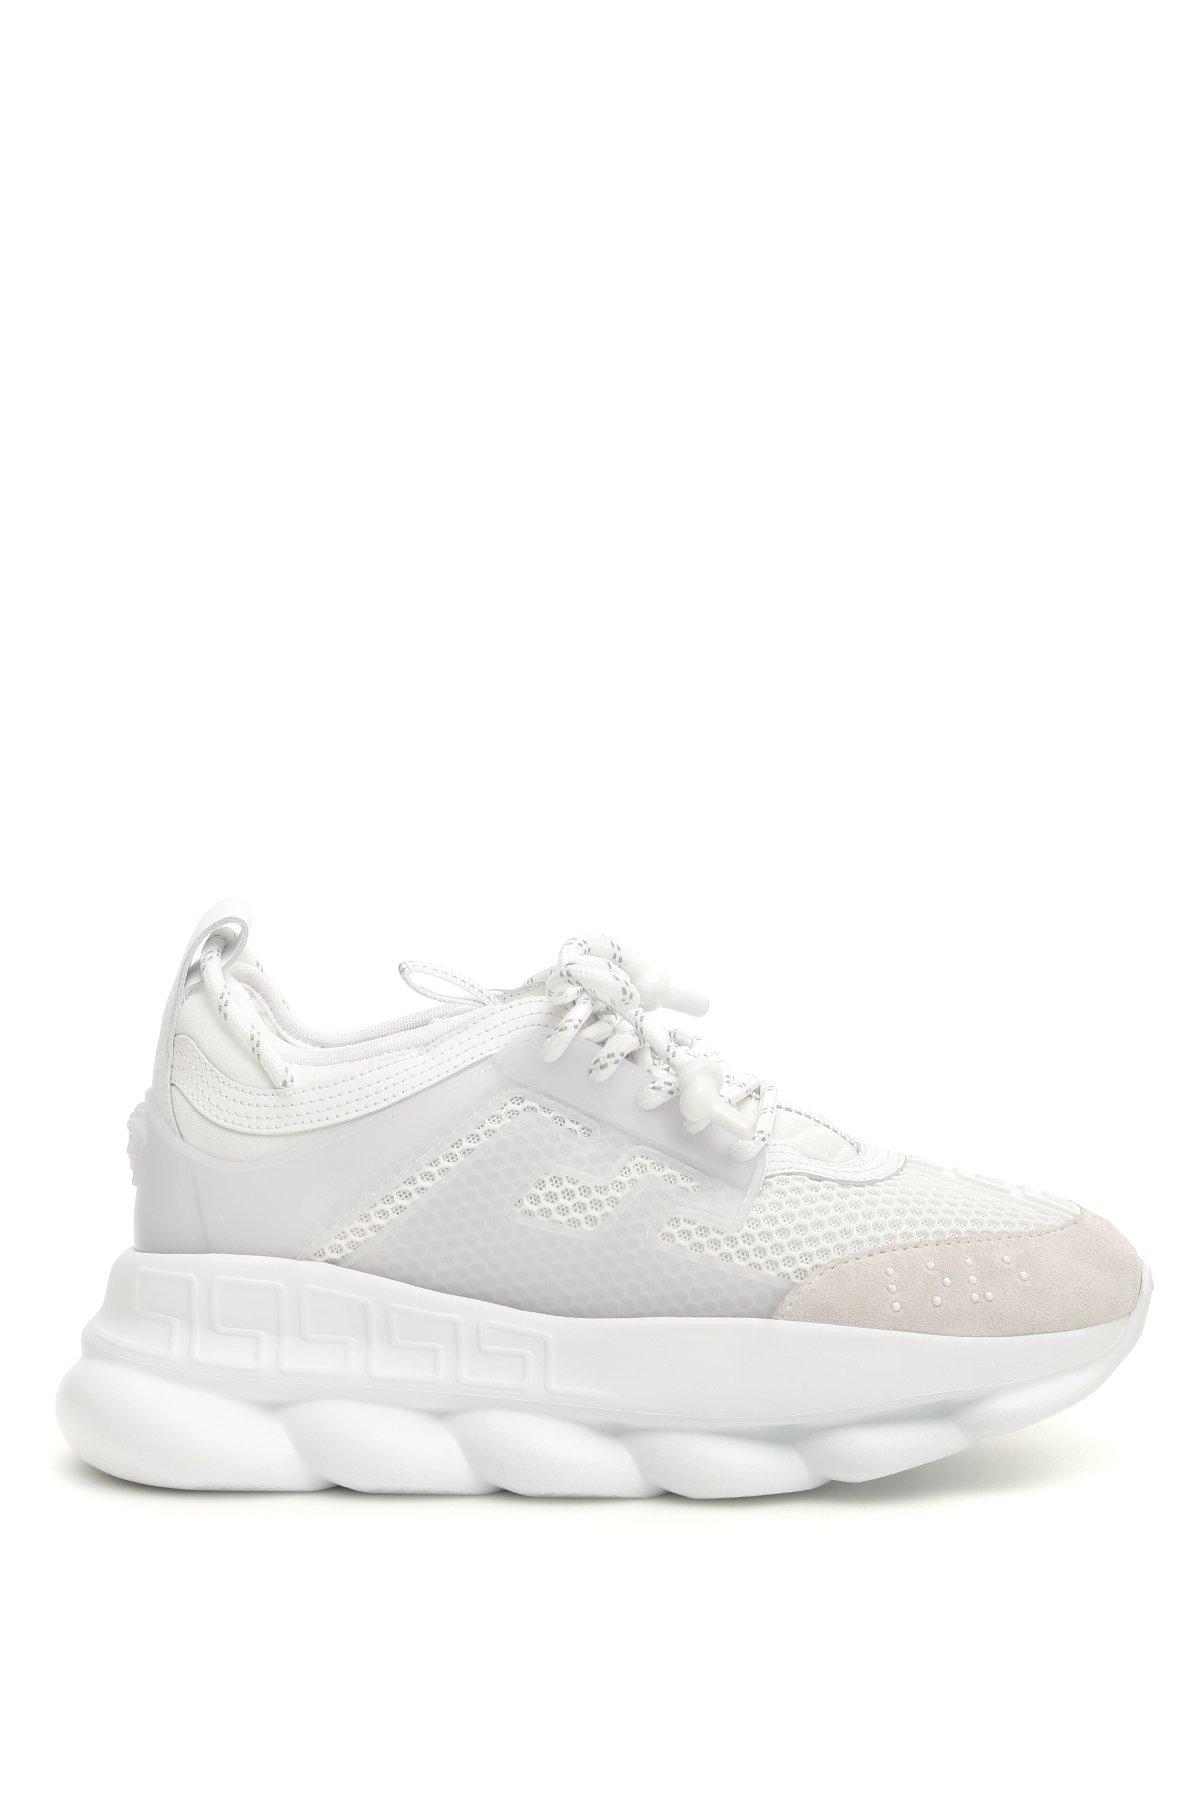 Versace Synthetic Chain Reaction Sneakers in White - Lyst